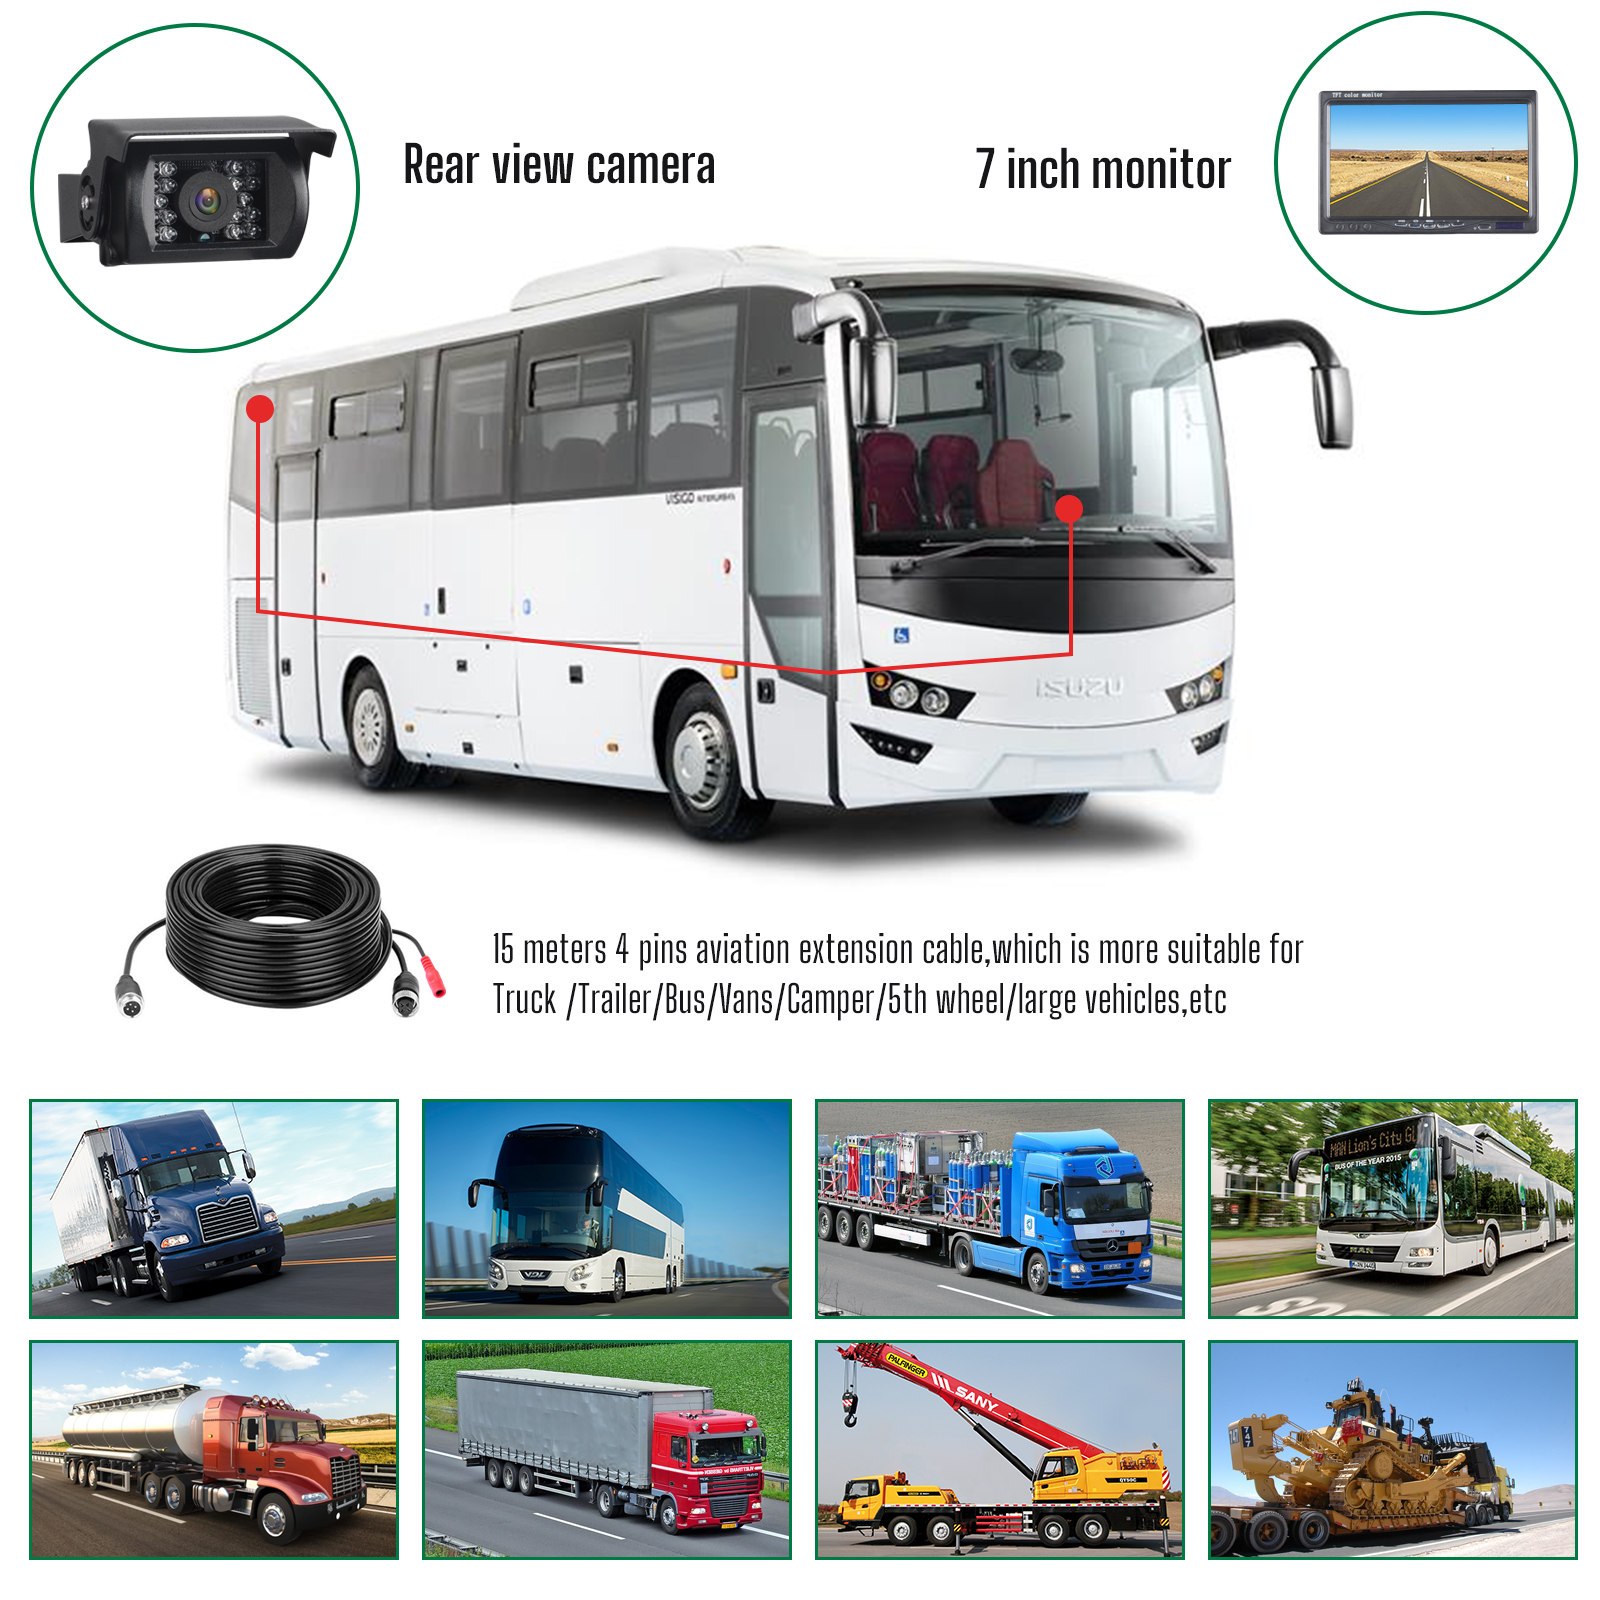 Vehicle Backup Camera and inch Screen Monitor Kit   IR Night Vision Reverse Rear View Parking Camera System with Pin 15m Cable for Bus RV Truck Tr - 1